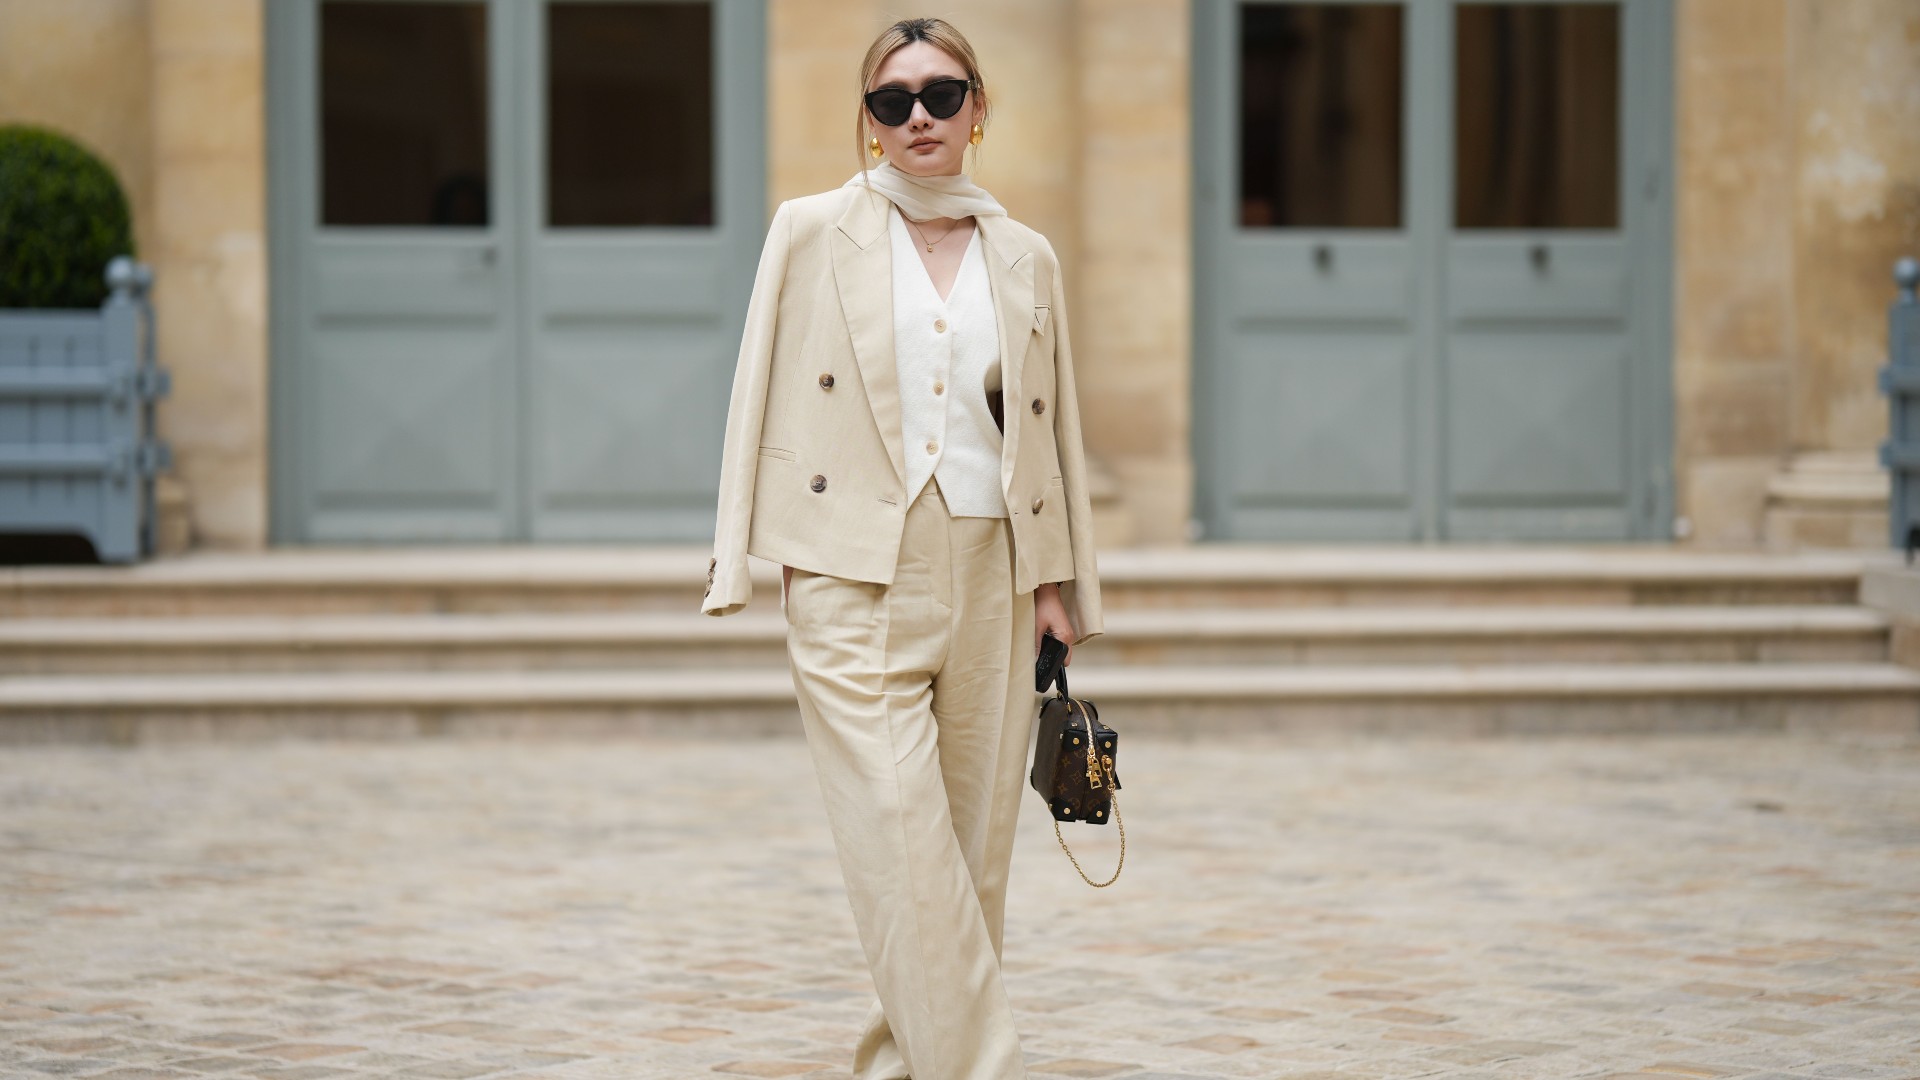 How to Style Linen Pants, According to a Stylist